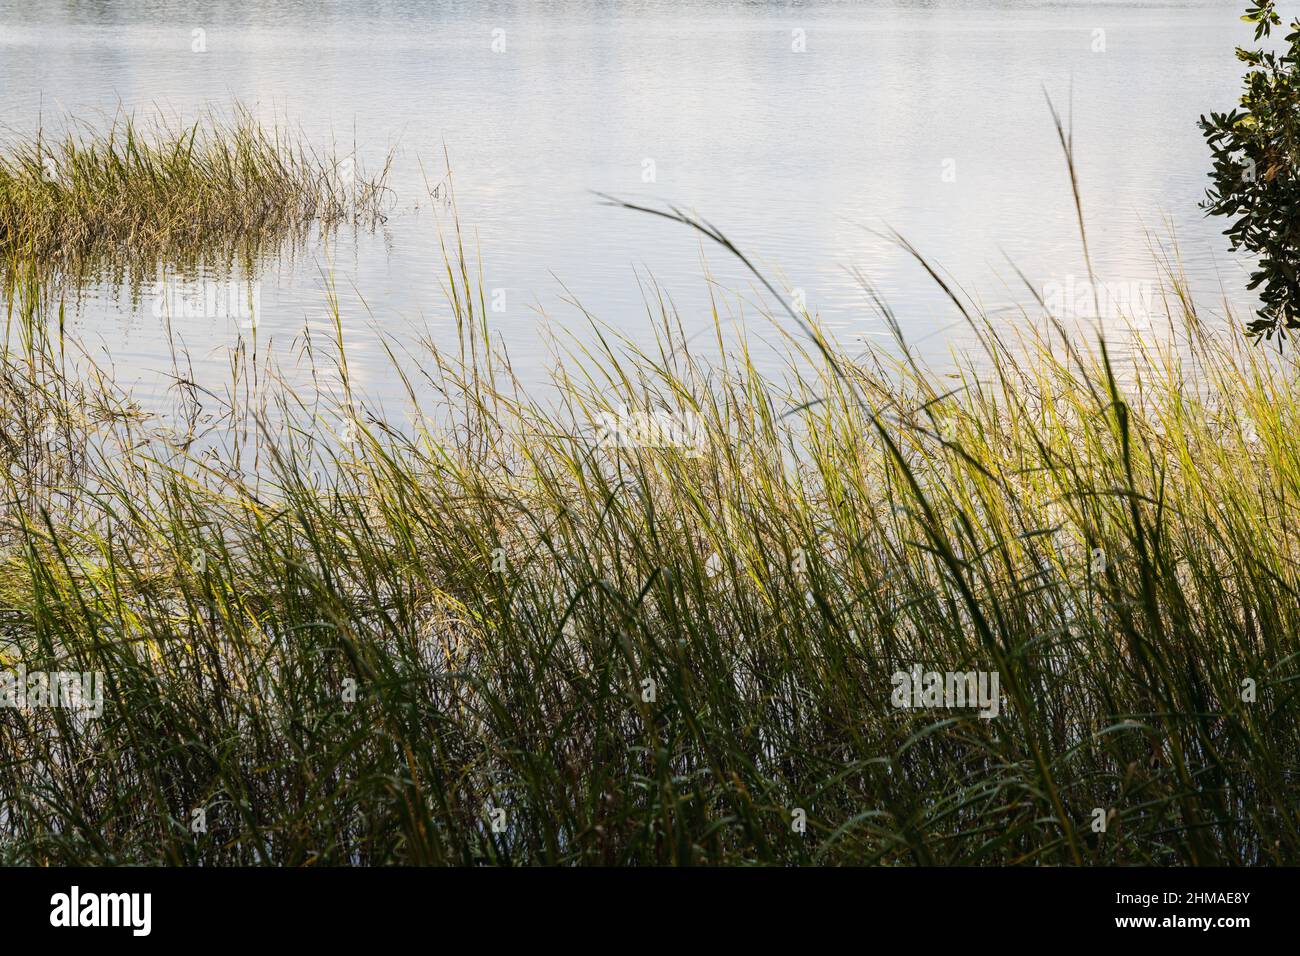 Spartina grass sways in the wind on brackish water in Beaufort, SC Stock Photo